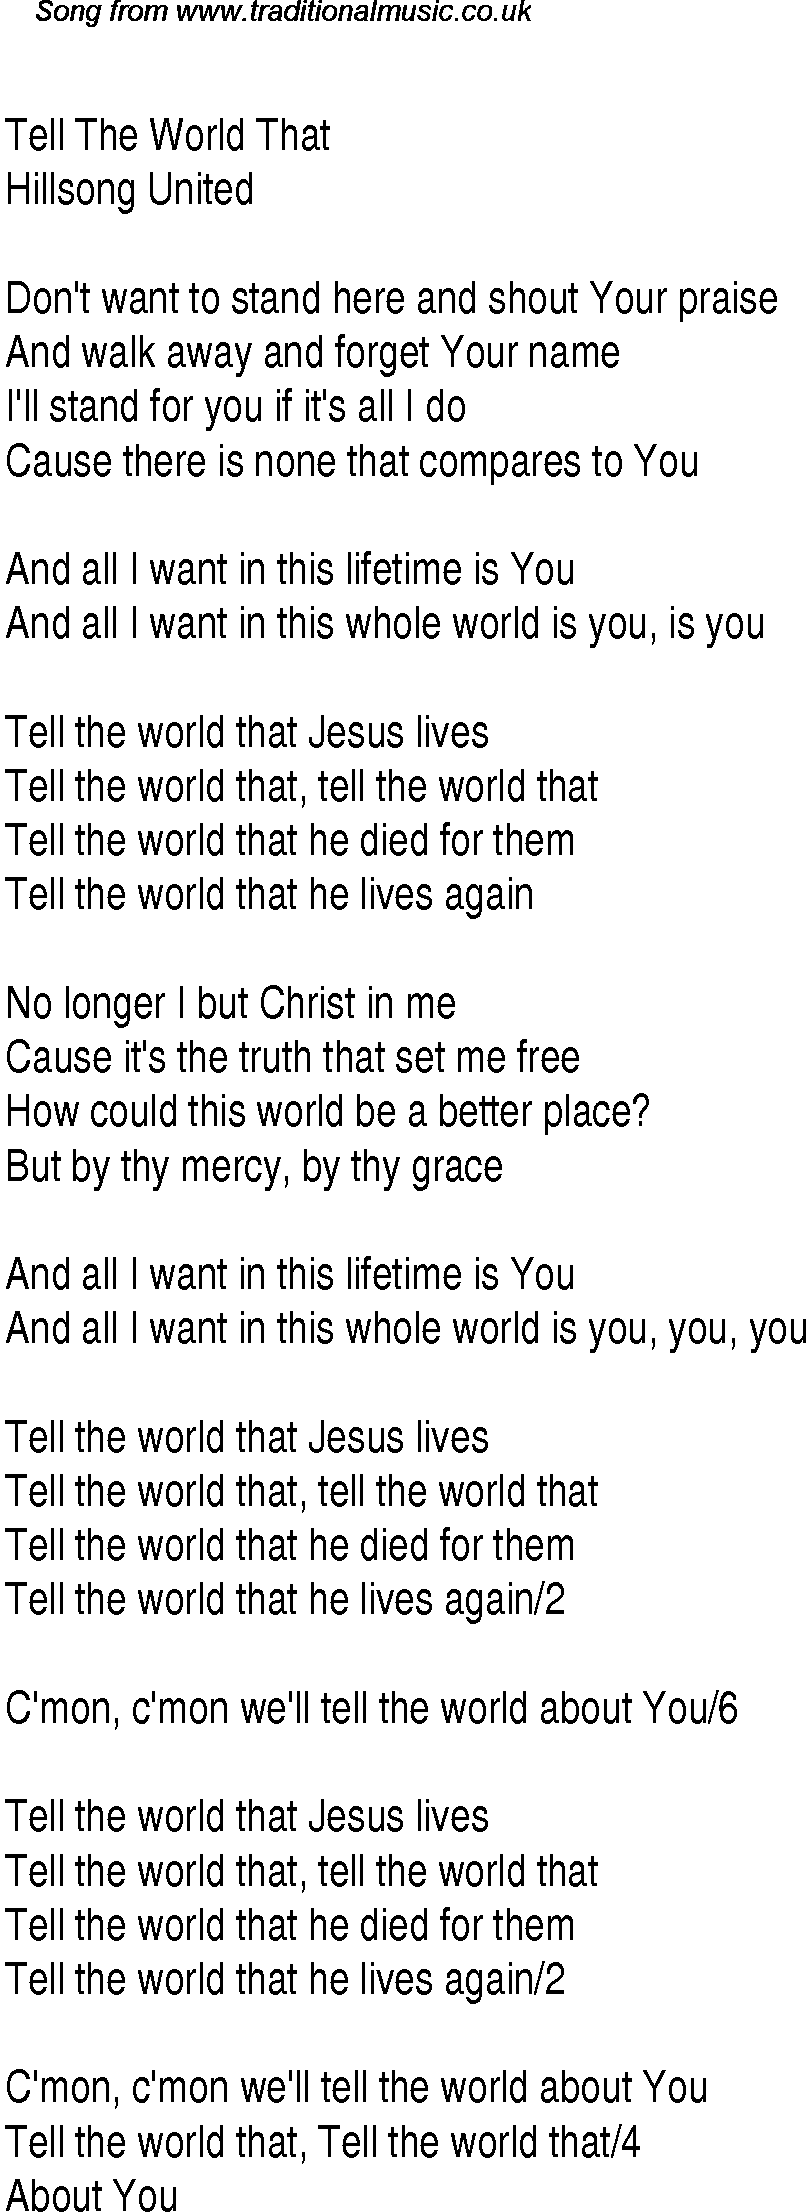 Gospel Song: tell-the-world-that, lyrics and chords.